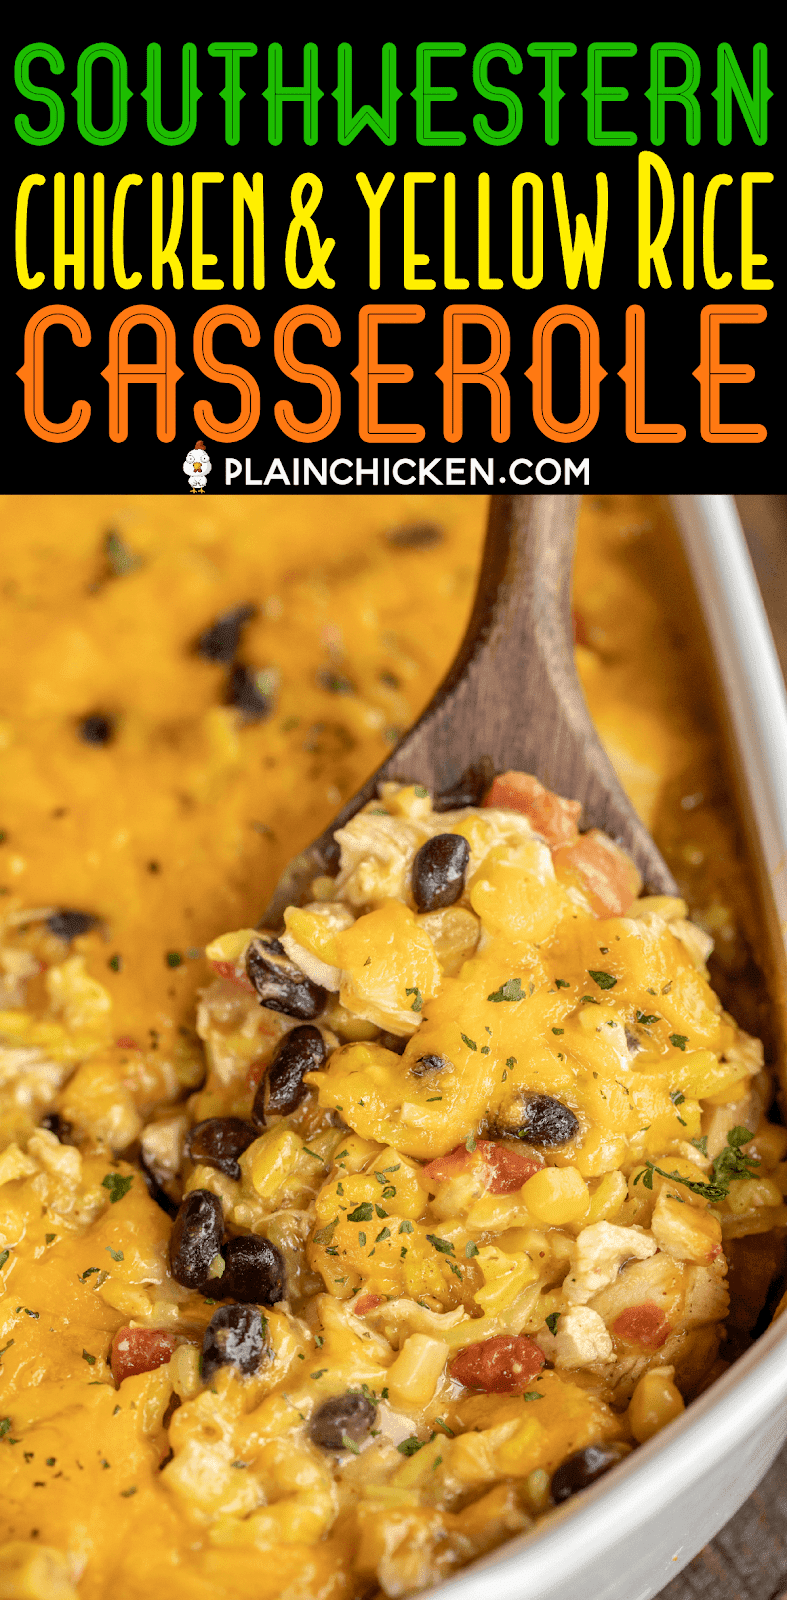 Southwestern Chicken & Yellow Rice Casserole - seriously delicious! We ate this for dinner and reheated for lunch the next day. Chicken, yellow rice, cream of chicken soup, corn, black beans, rotel diced tomatoes and green chiles and cheese.Use a rotisserie chicken and this is ready to bake in minutes. Can make in advance and refrigerate or freeze for later. Everyone LOVES this quick and easy weeknight casserole recipe! #freezermeal #chicken #casserole #mexican #chickencasserole 